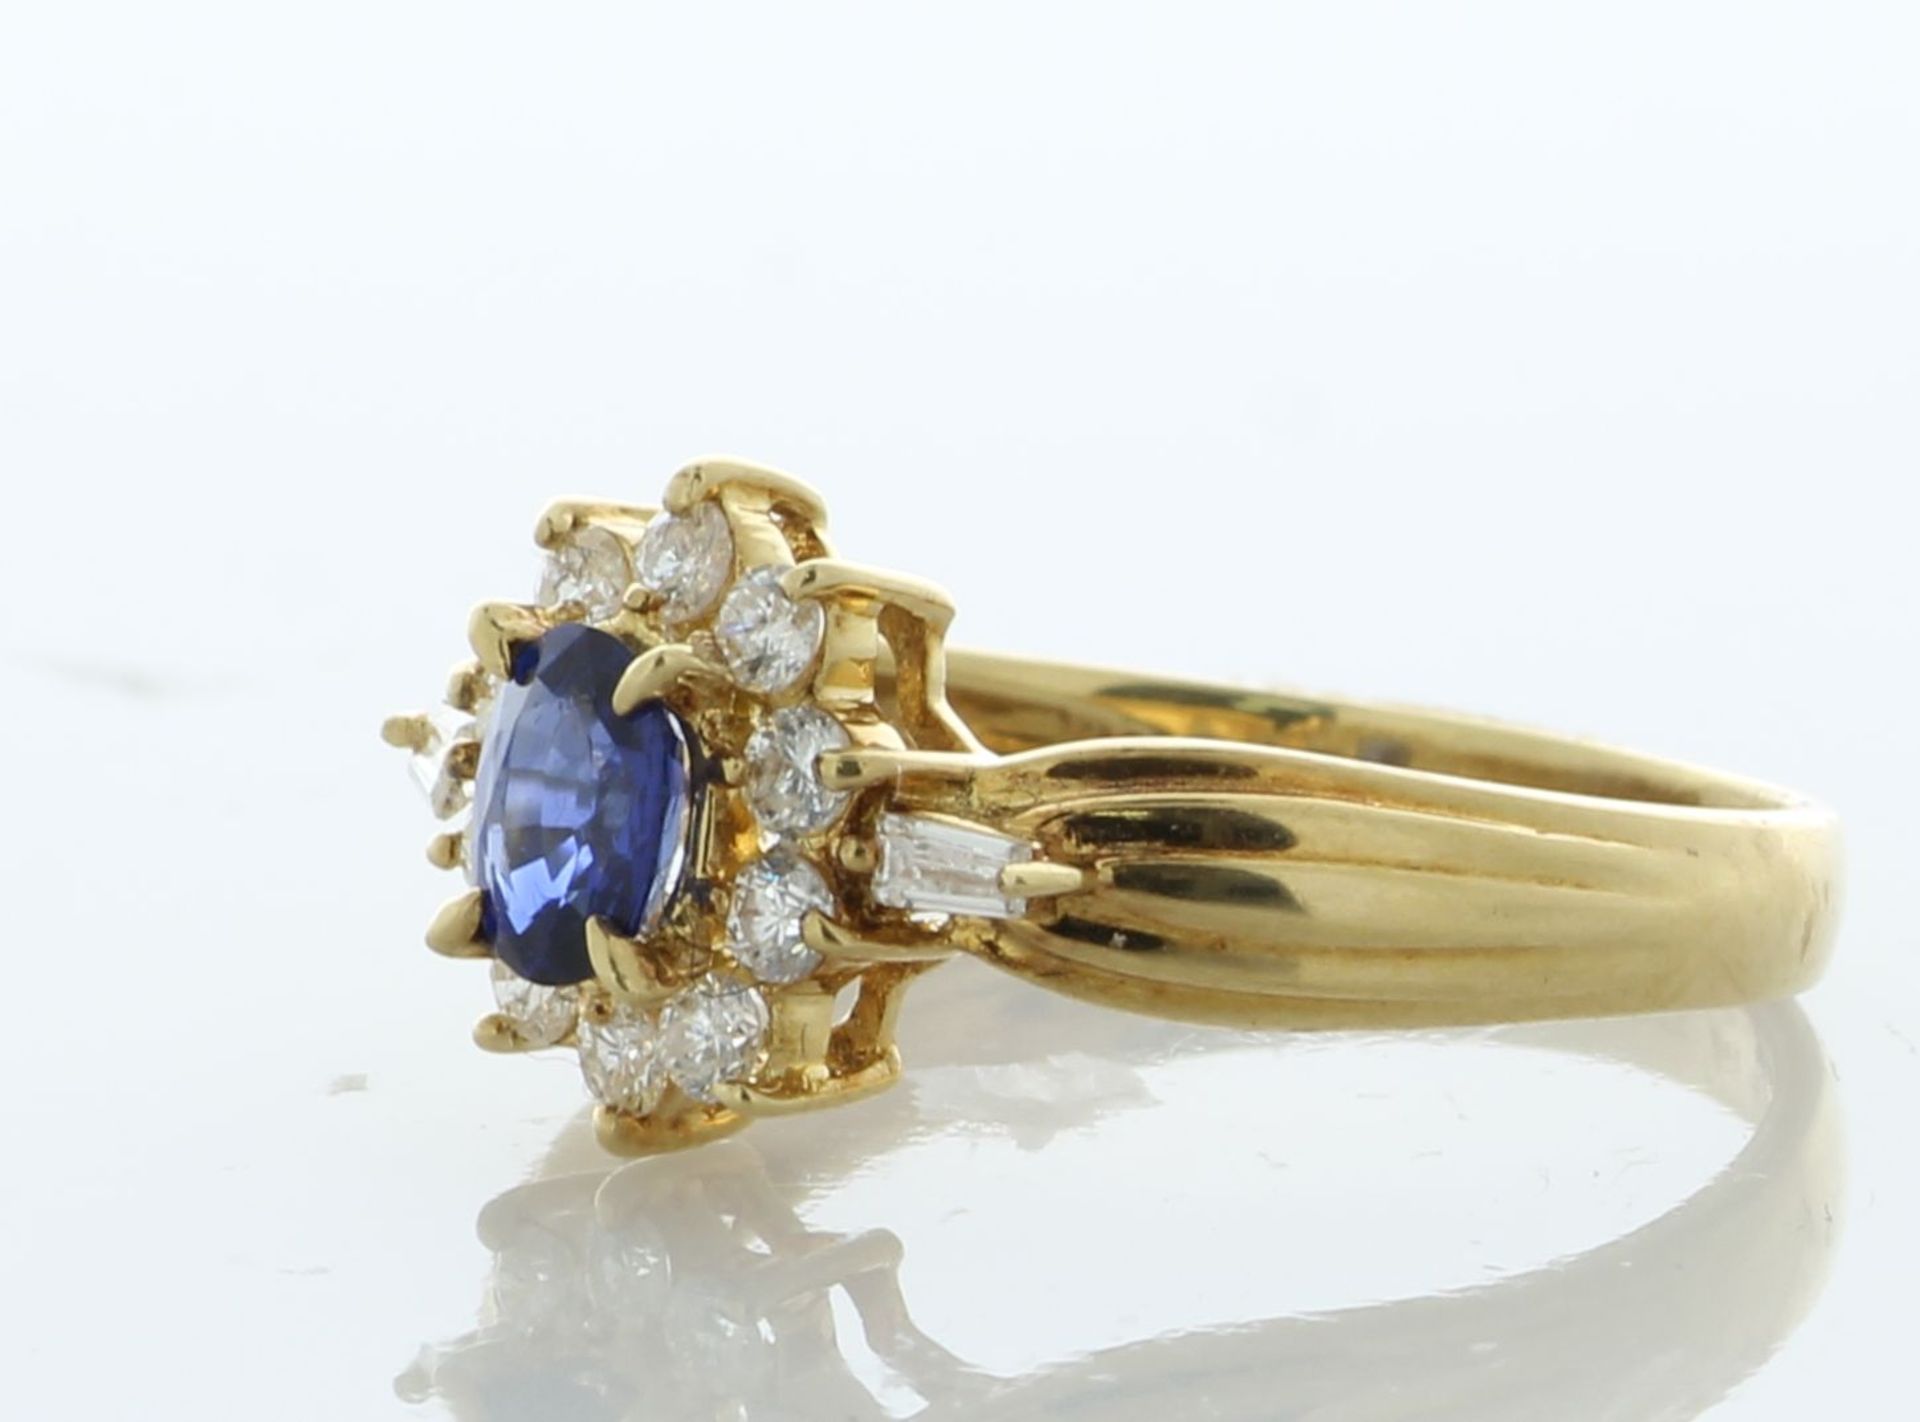 18ct Yellow Gold Oval Cut Sapphire And Diamond Ring (S0.45) 0.30 Carats - Valued By IDI £5,950. - Image 4 of 5